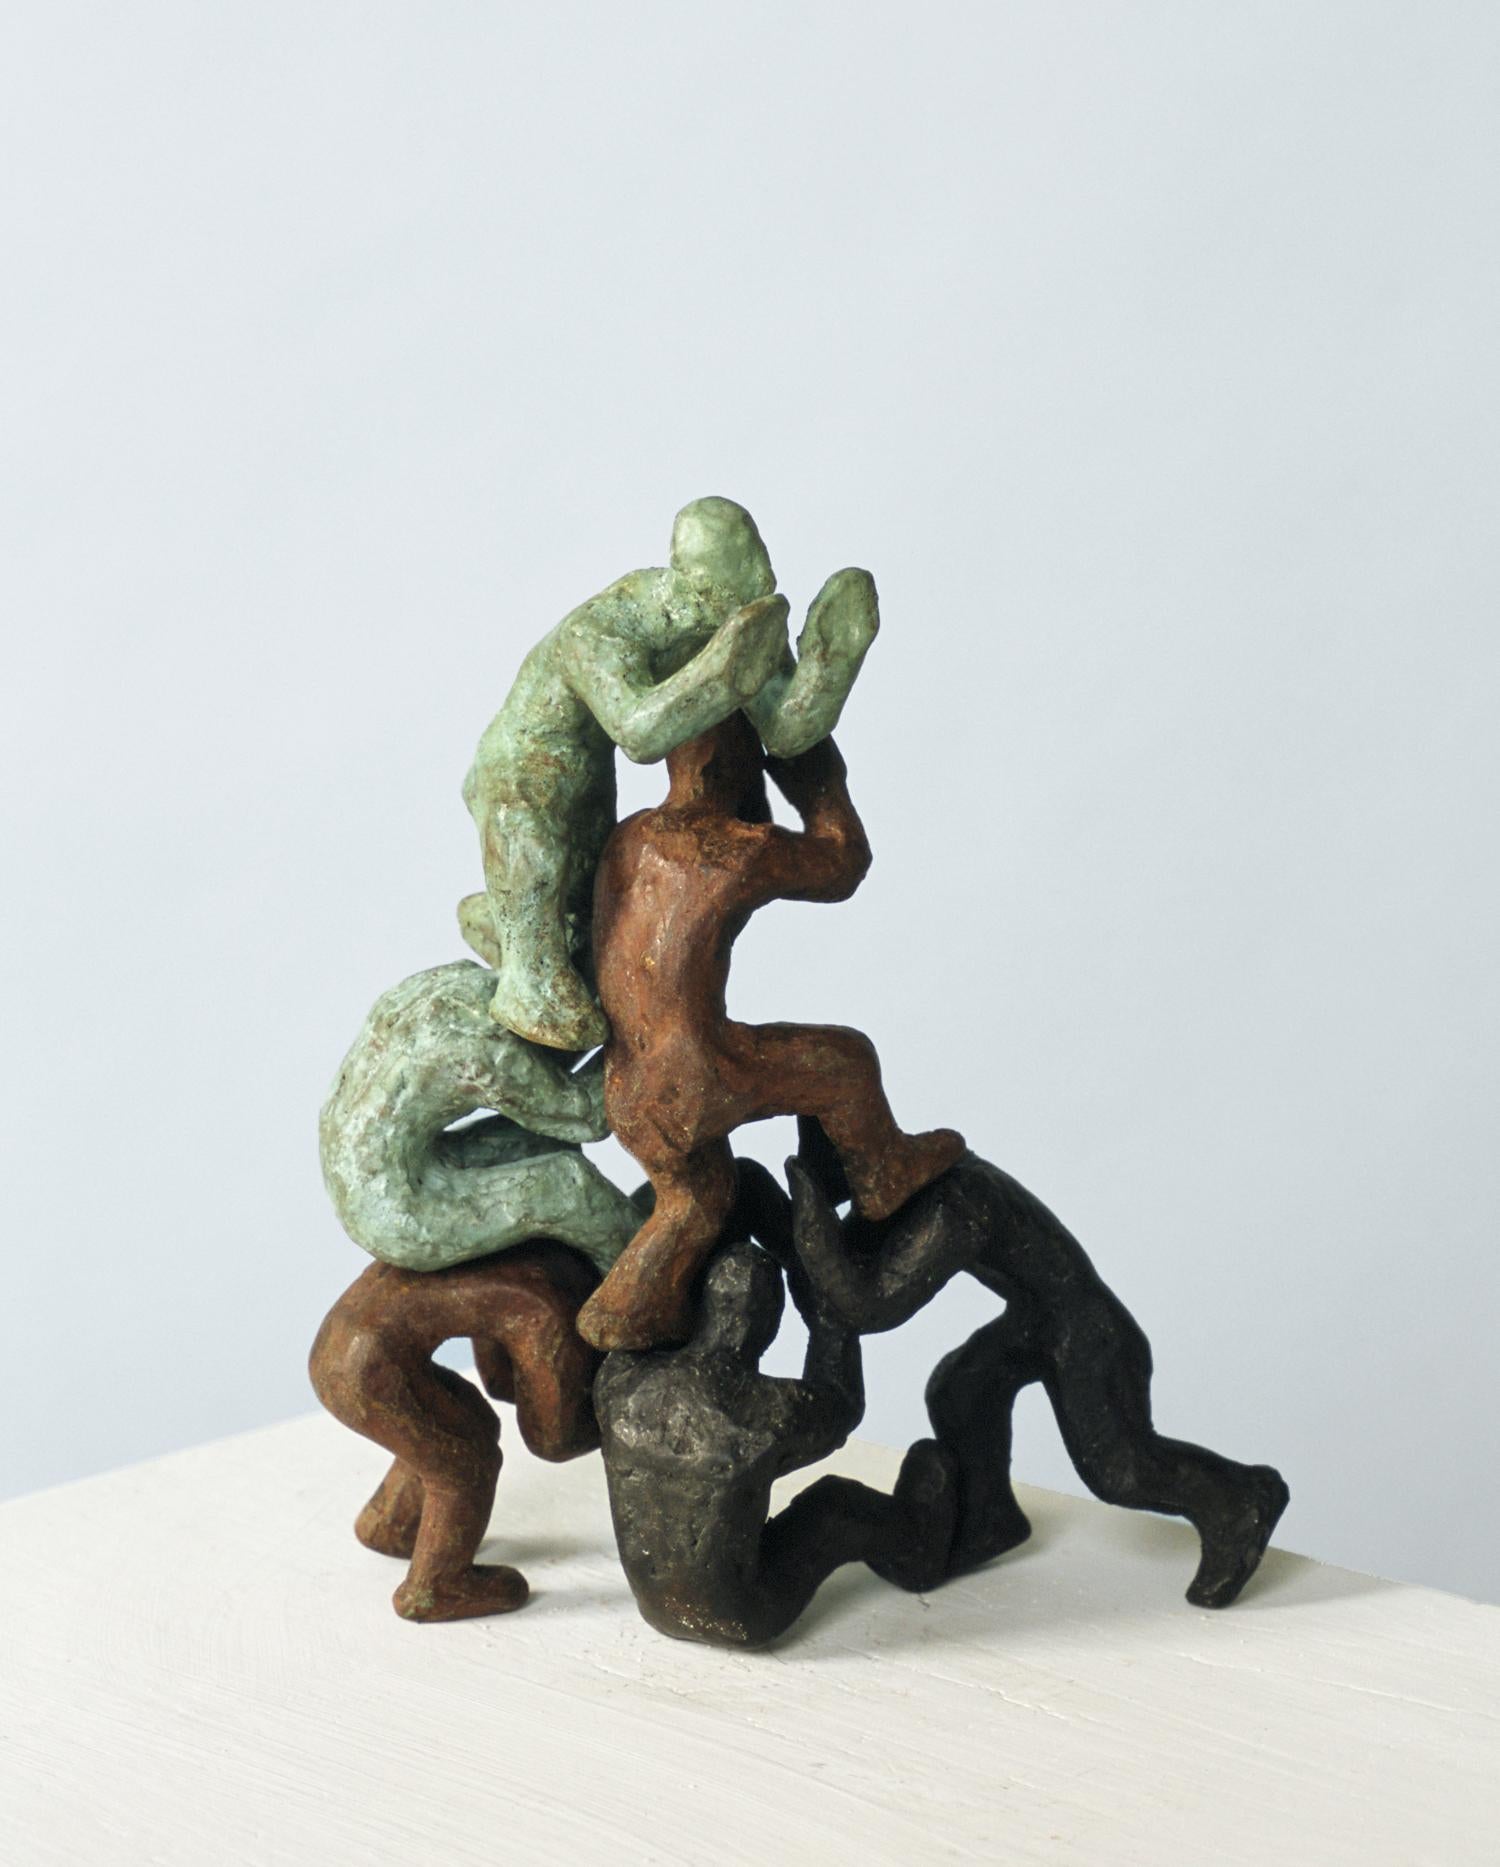 Why Fight When You Can Play? -4 Pairs playful interactive bronze figures  2